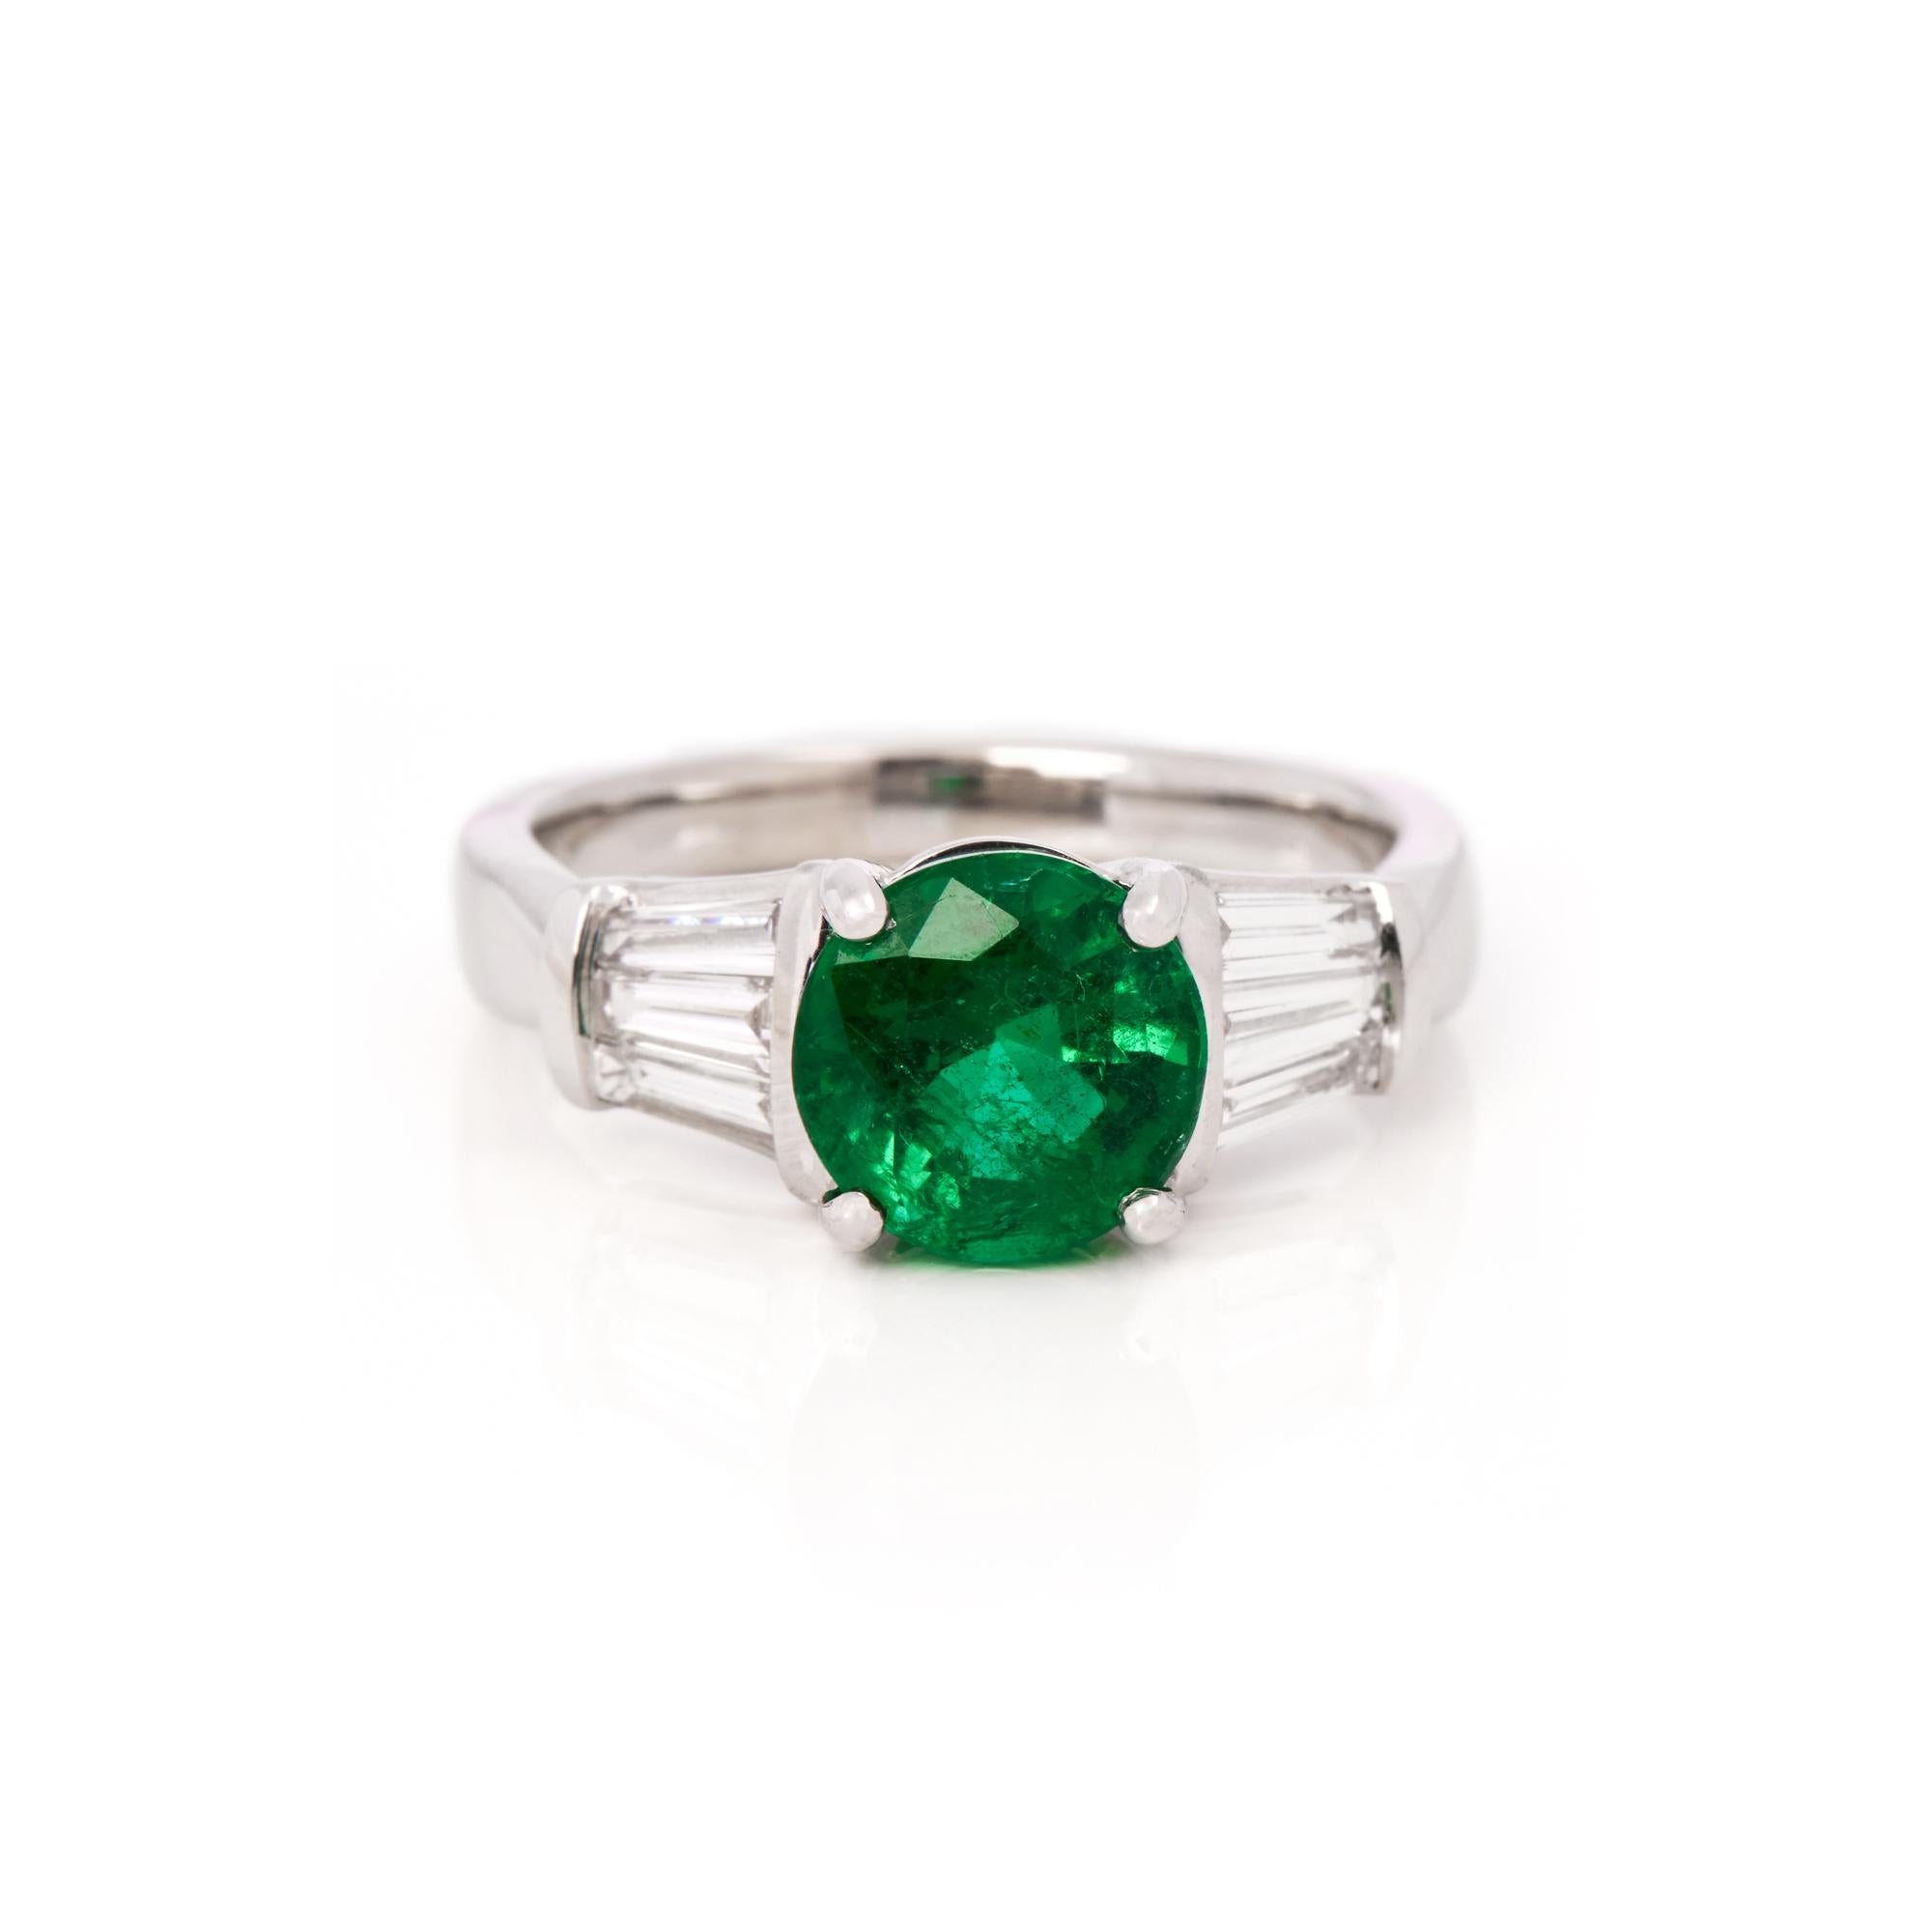 This ring is from the private collection of gemstone jewellery individually designed by David Jerome. It features a round cut emerald set with diamonds. Accompanied by an IGR gem certificate. UK ring size L. EU ring size 51. US ring size 6. 